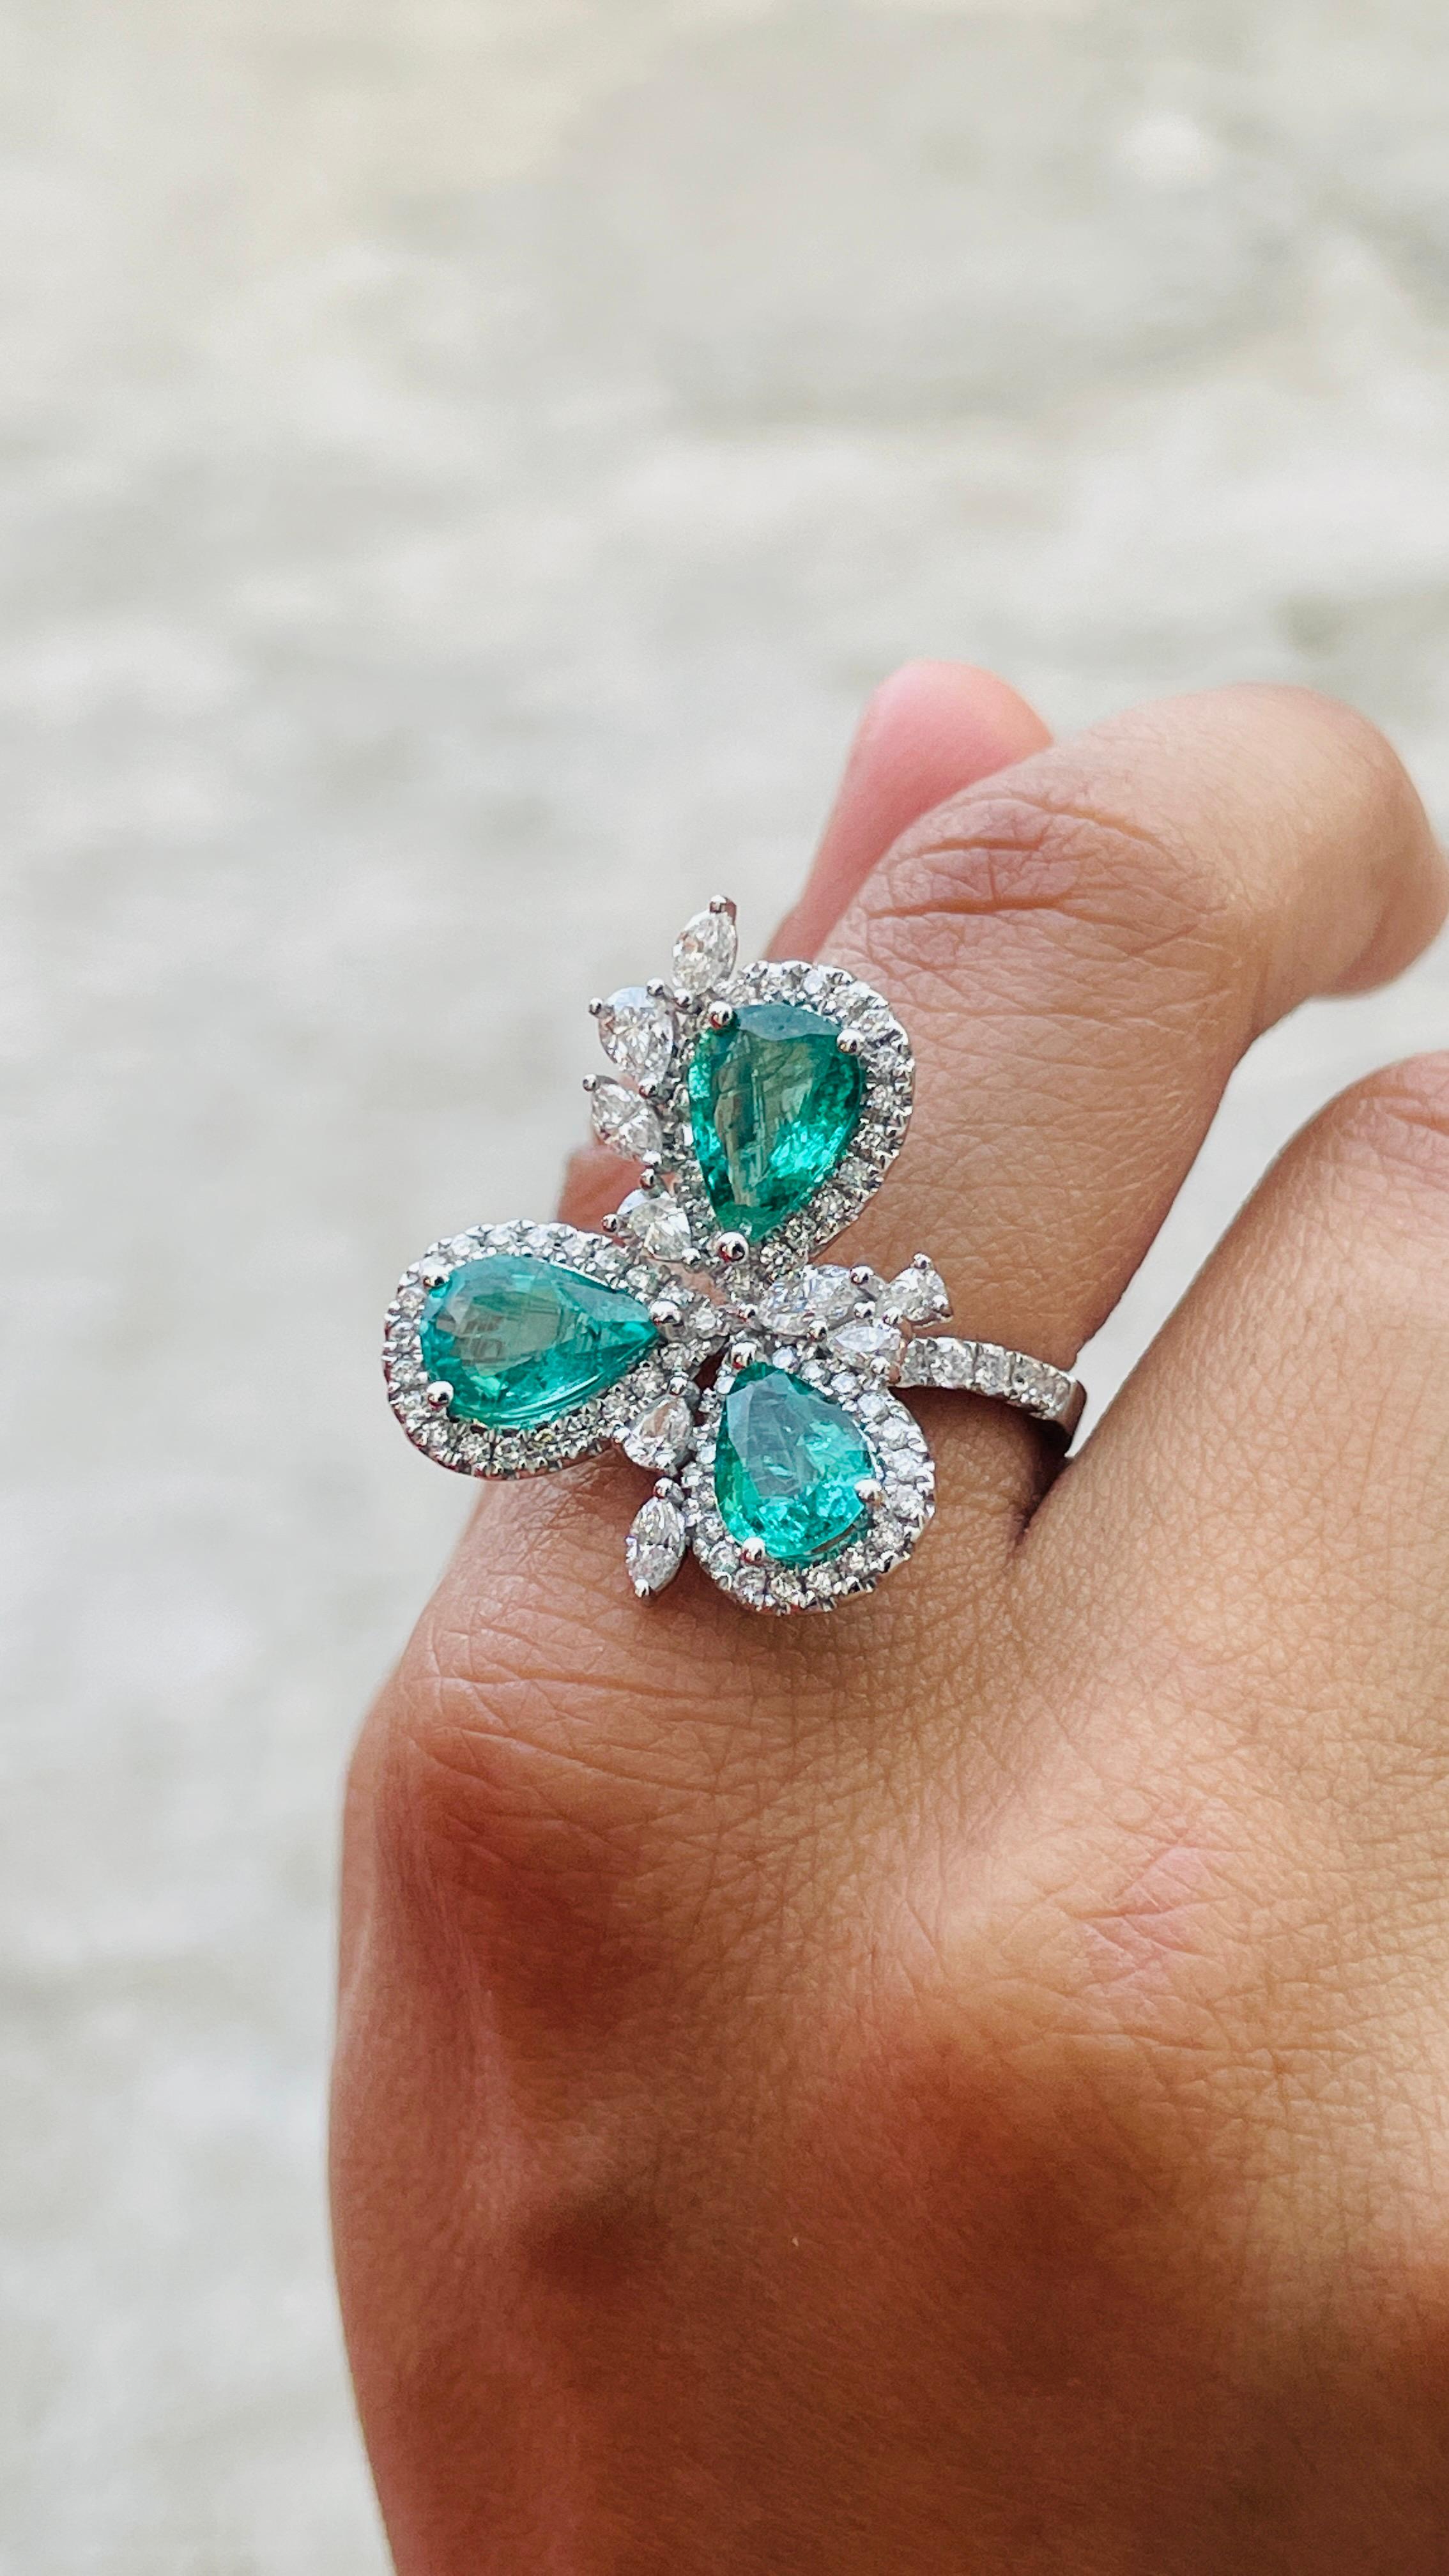 For Sale:  Magnificent 3.32 ct Emerald Cocktail Ring in 14K White Gold with Diamonds 5